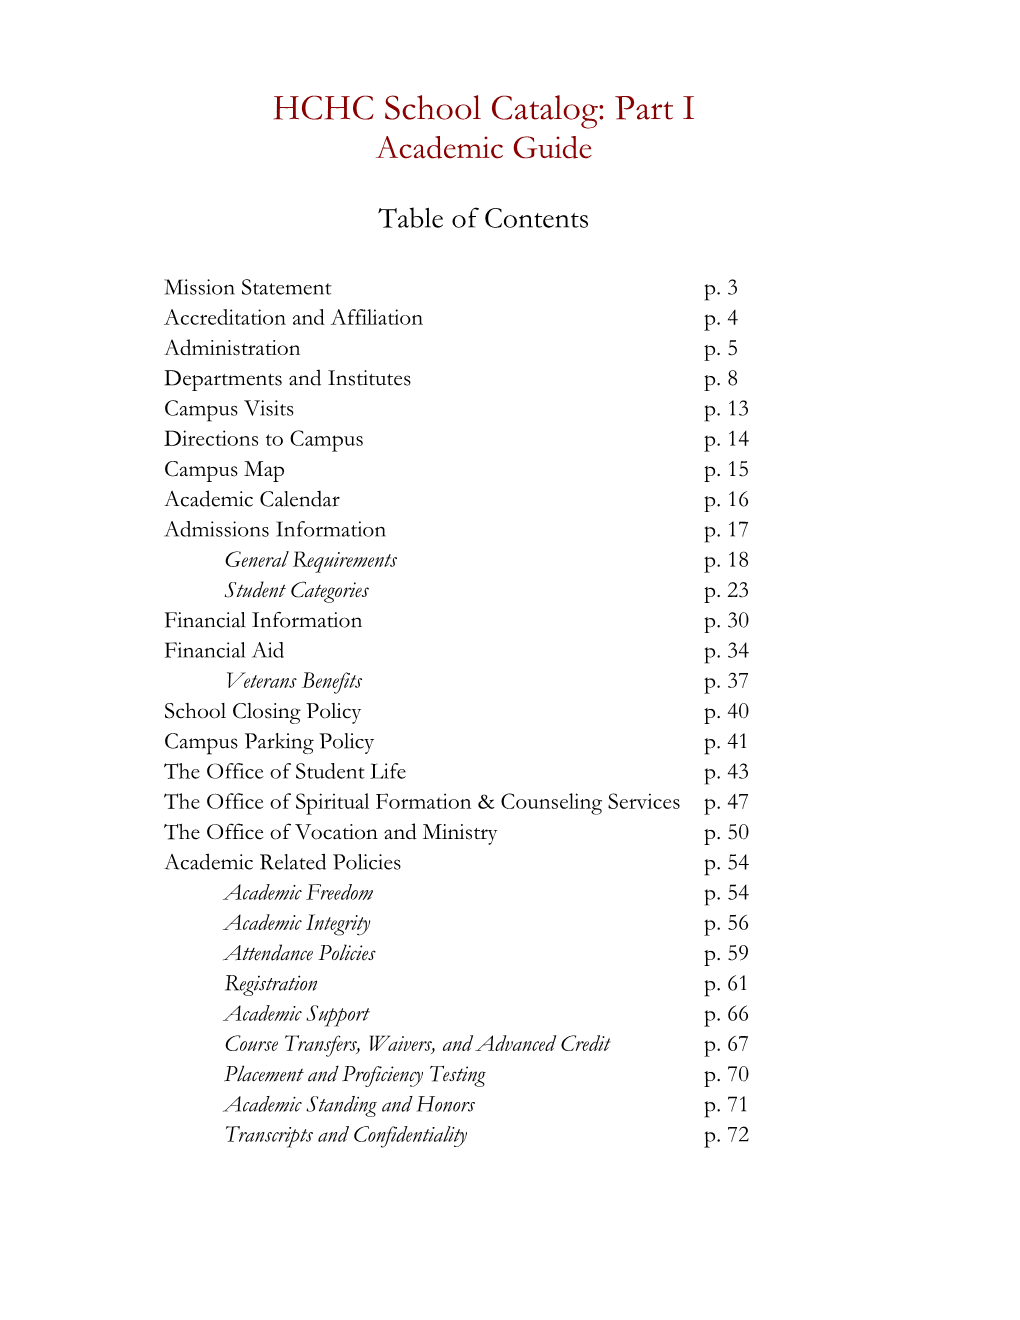 Academic Guide and Catalog